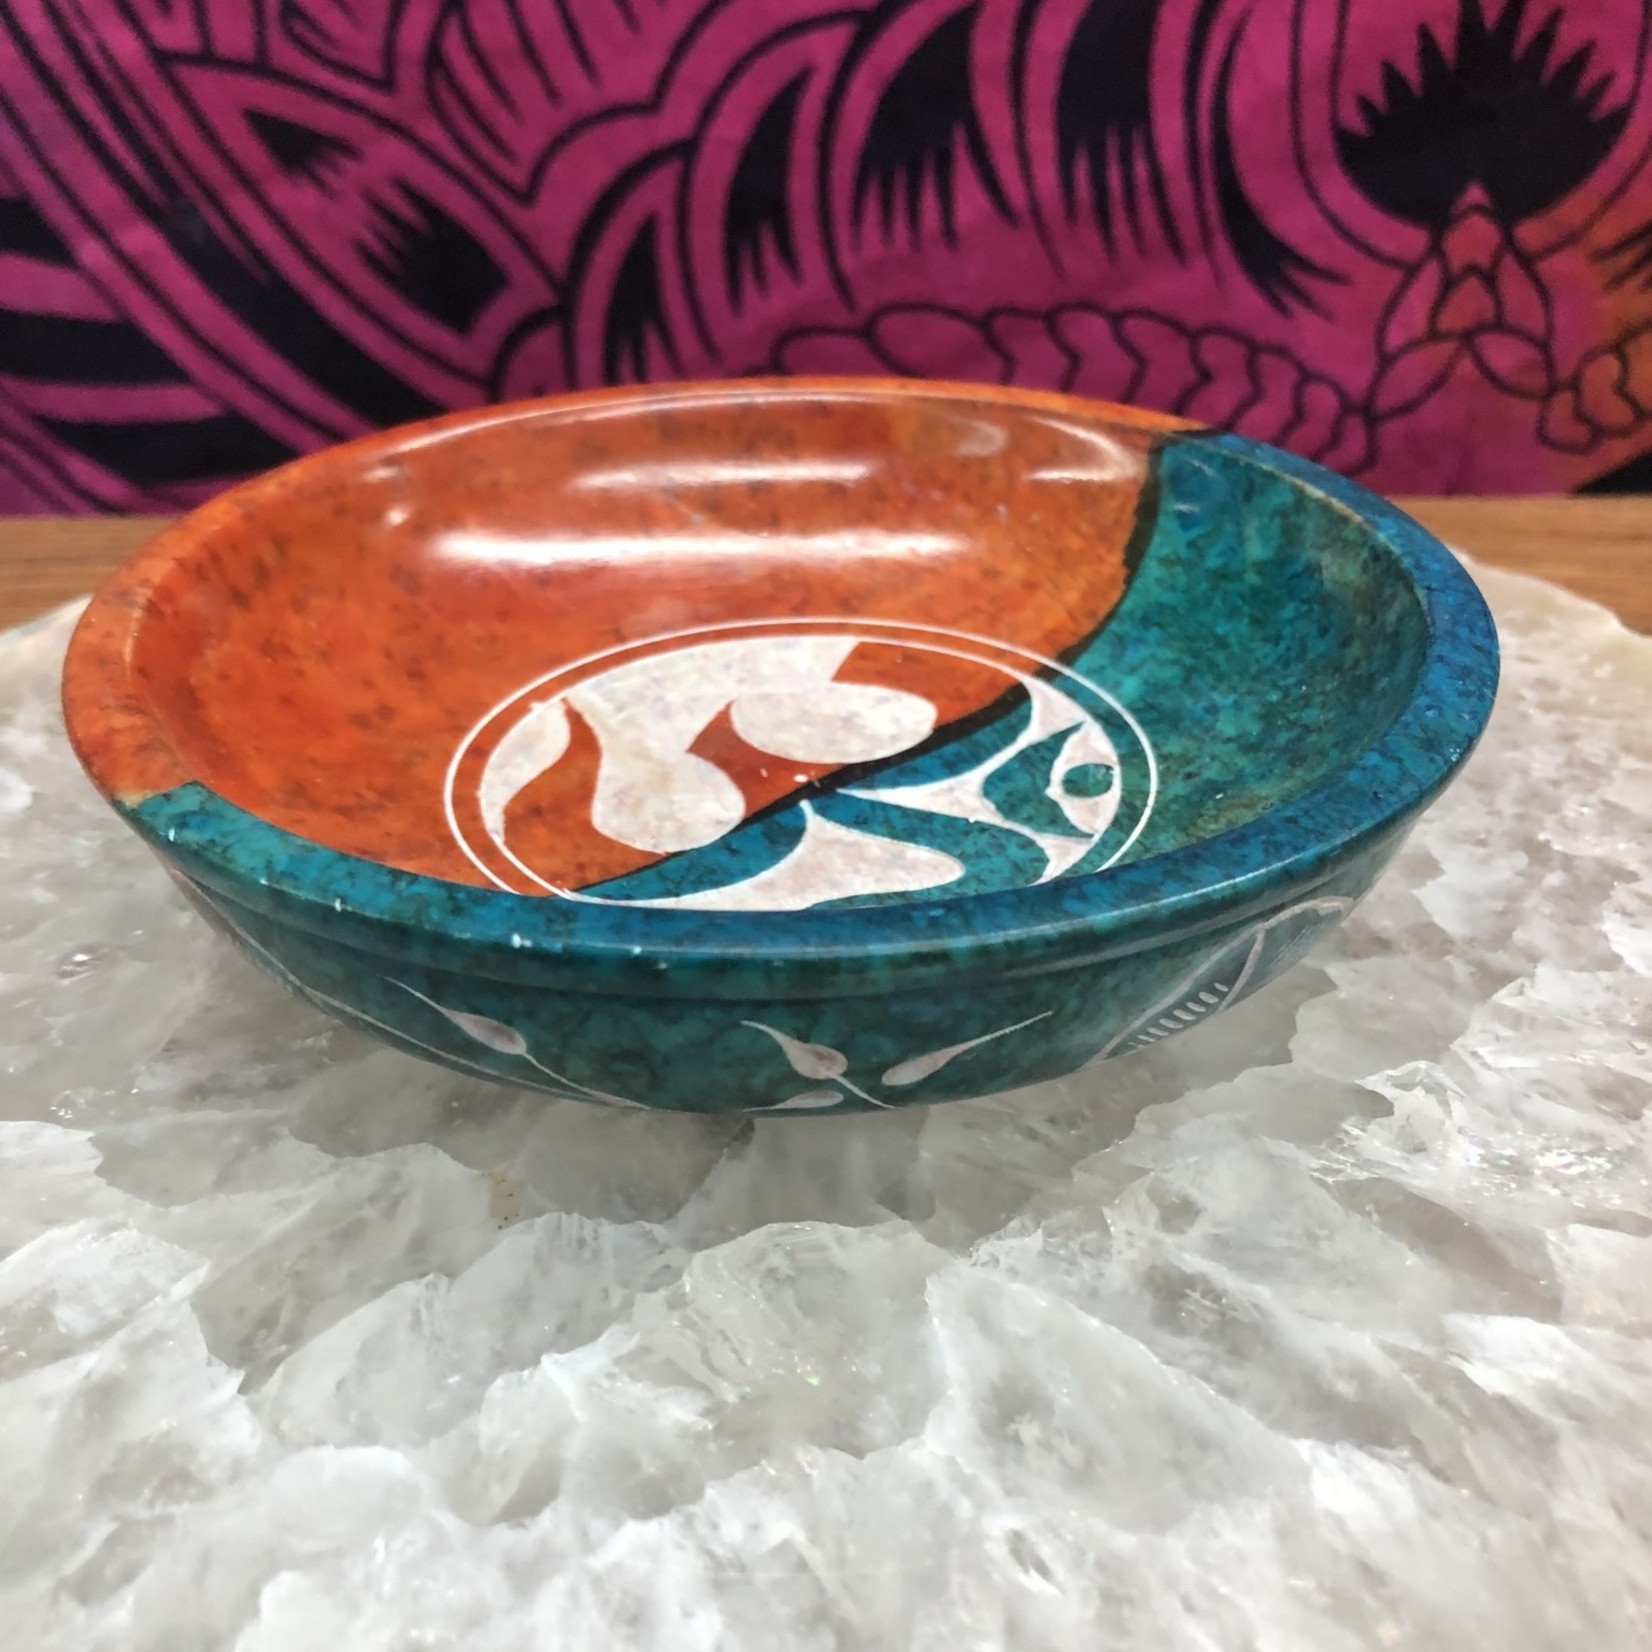 OM - Scrying & Smudge Bowl